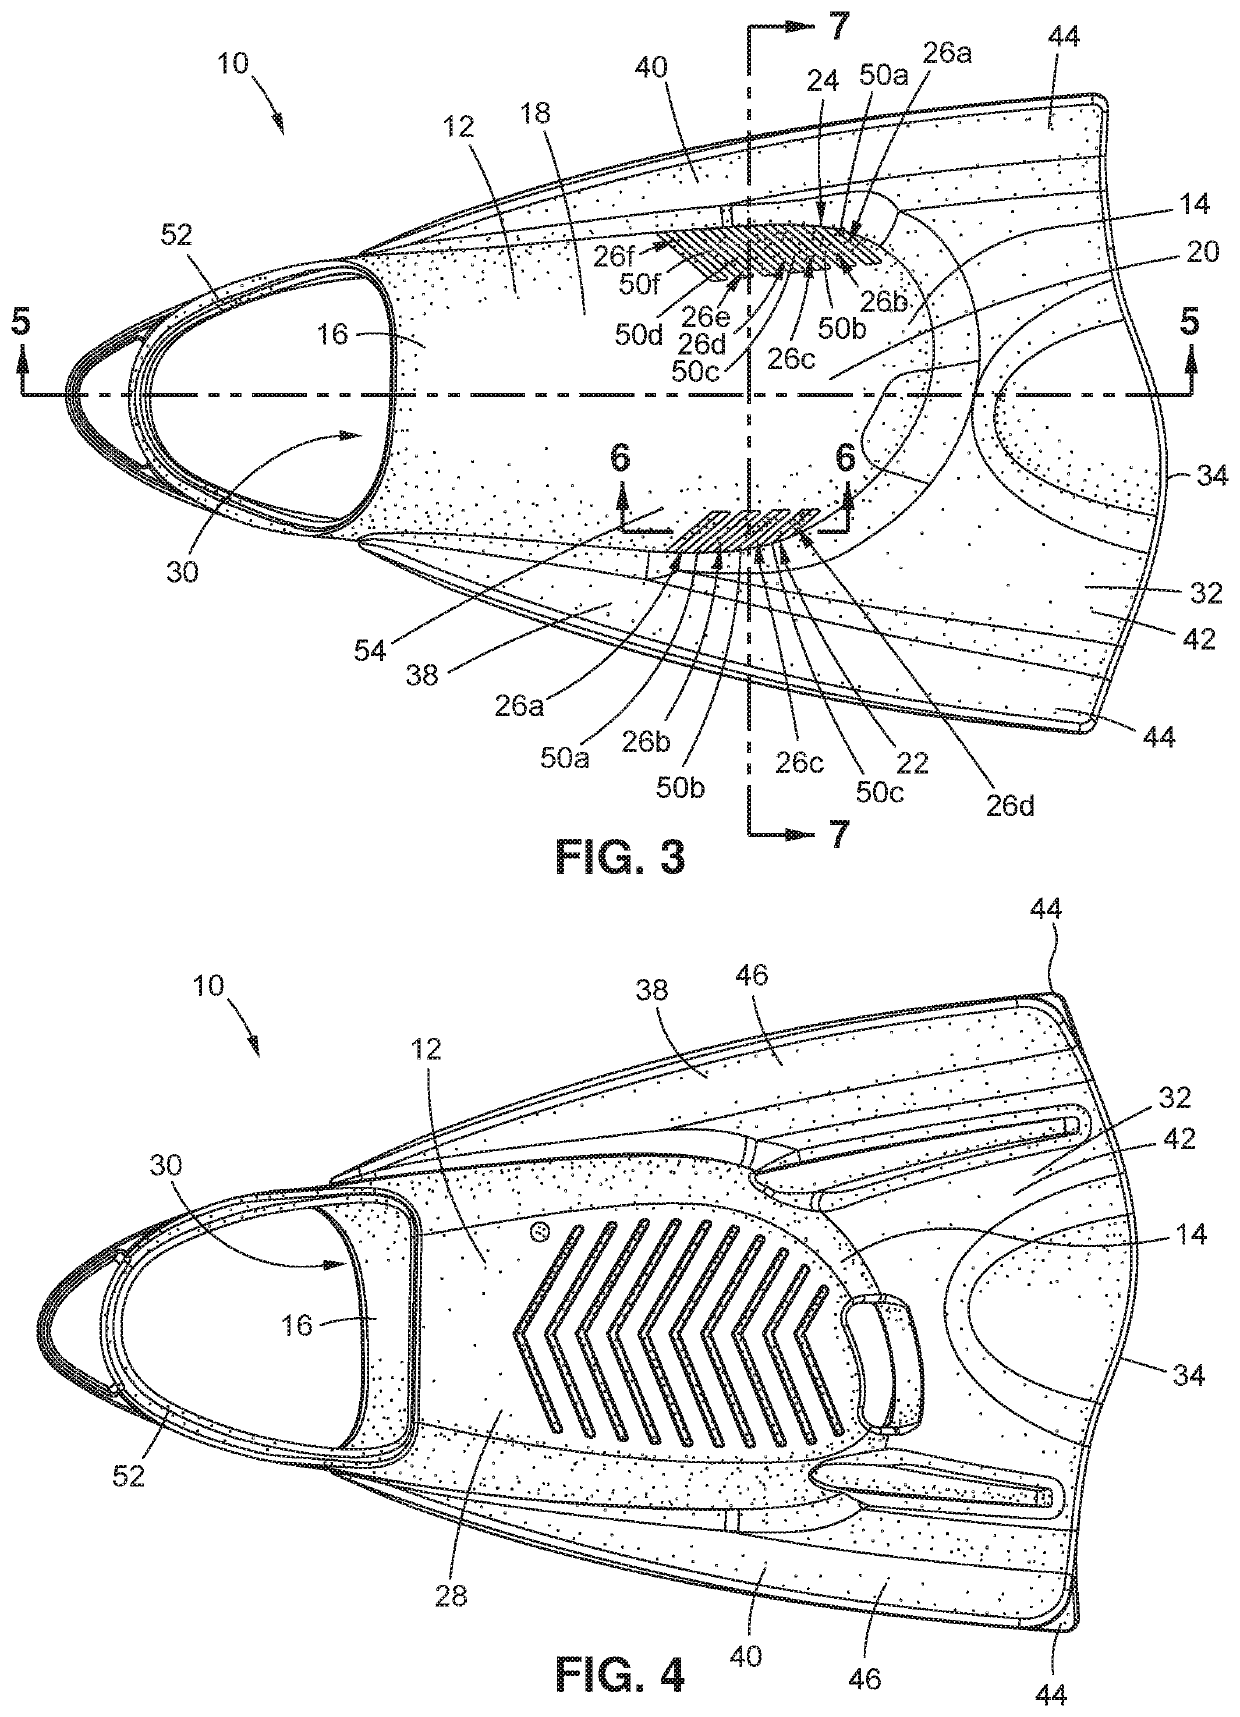 Swim fin with an upper portion having debossed regions and triple-bladed rails